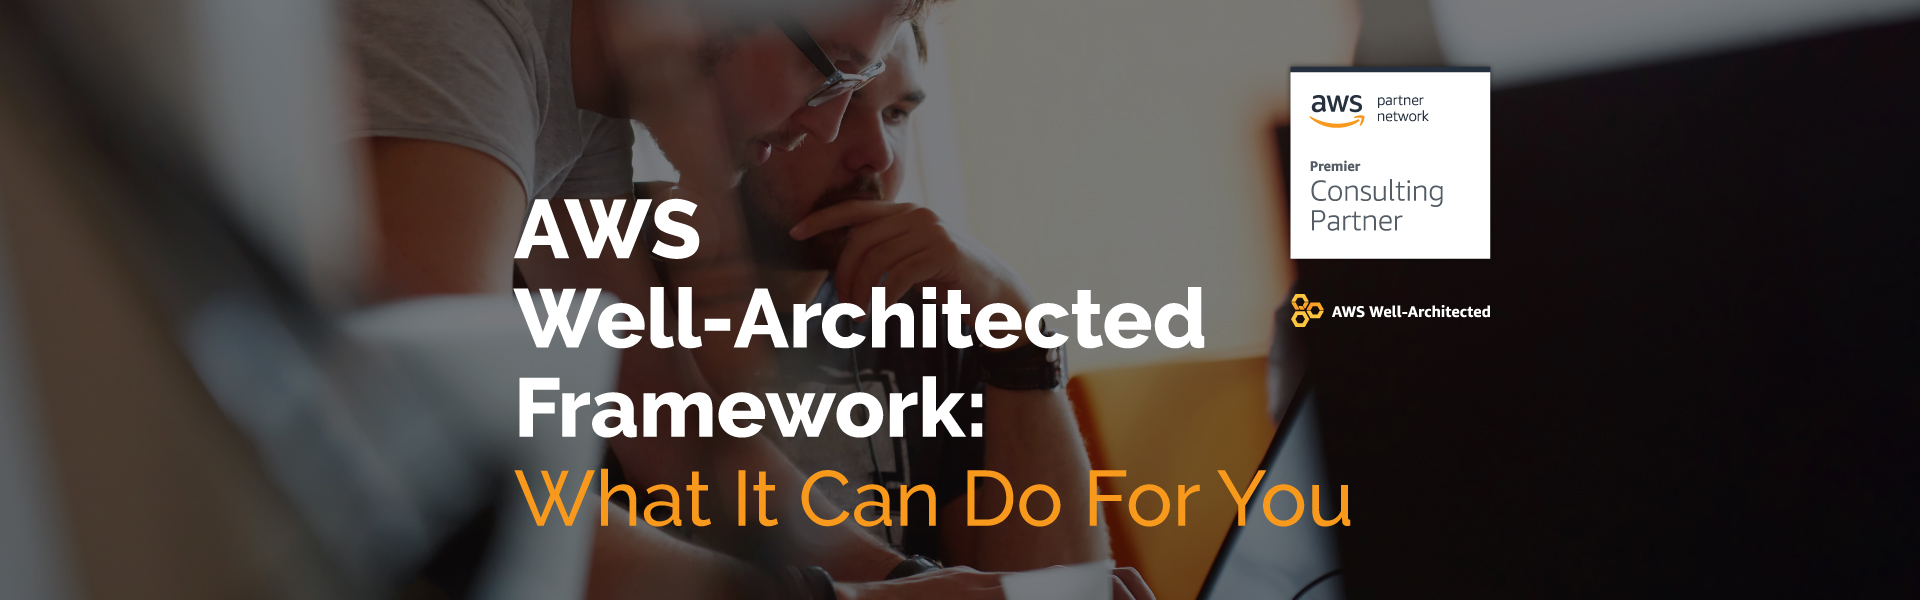 AWS Well-Architected Framework: What It Can Do For You